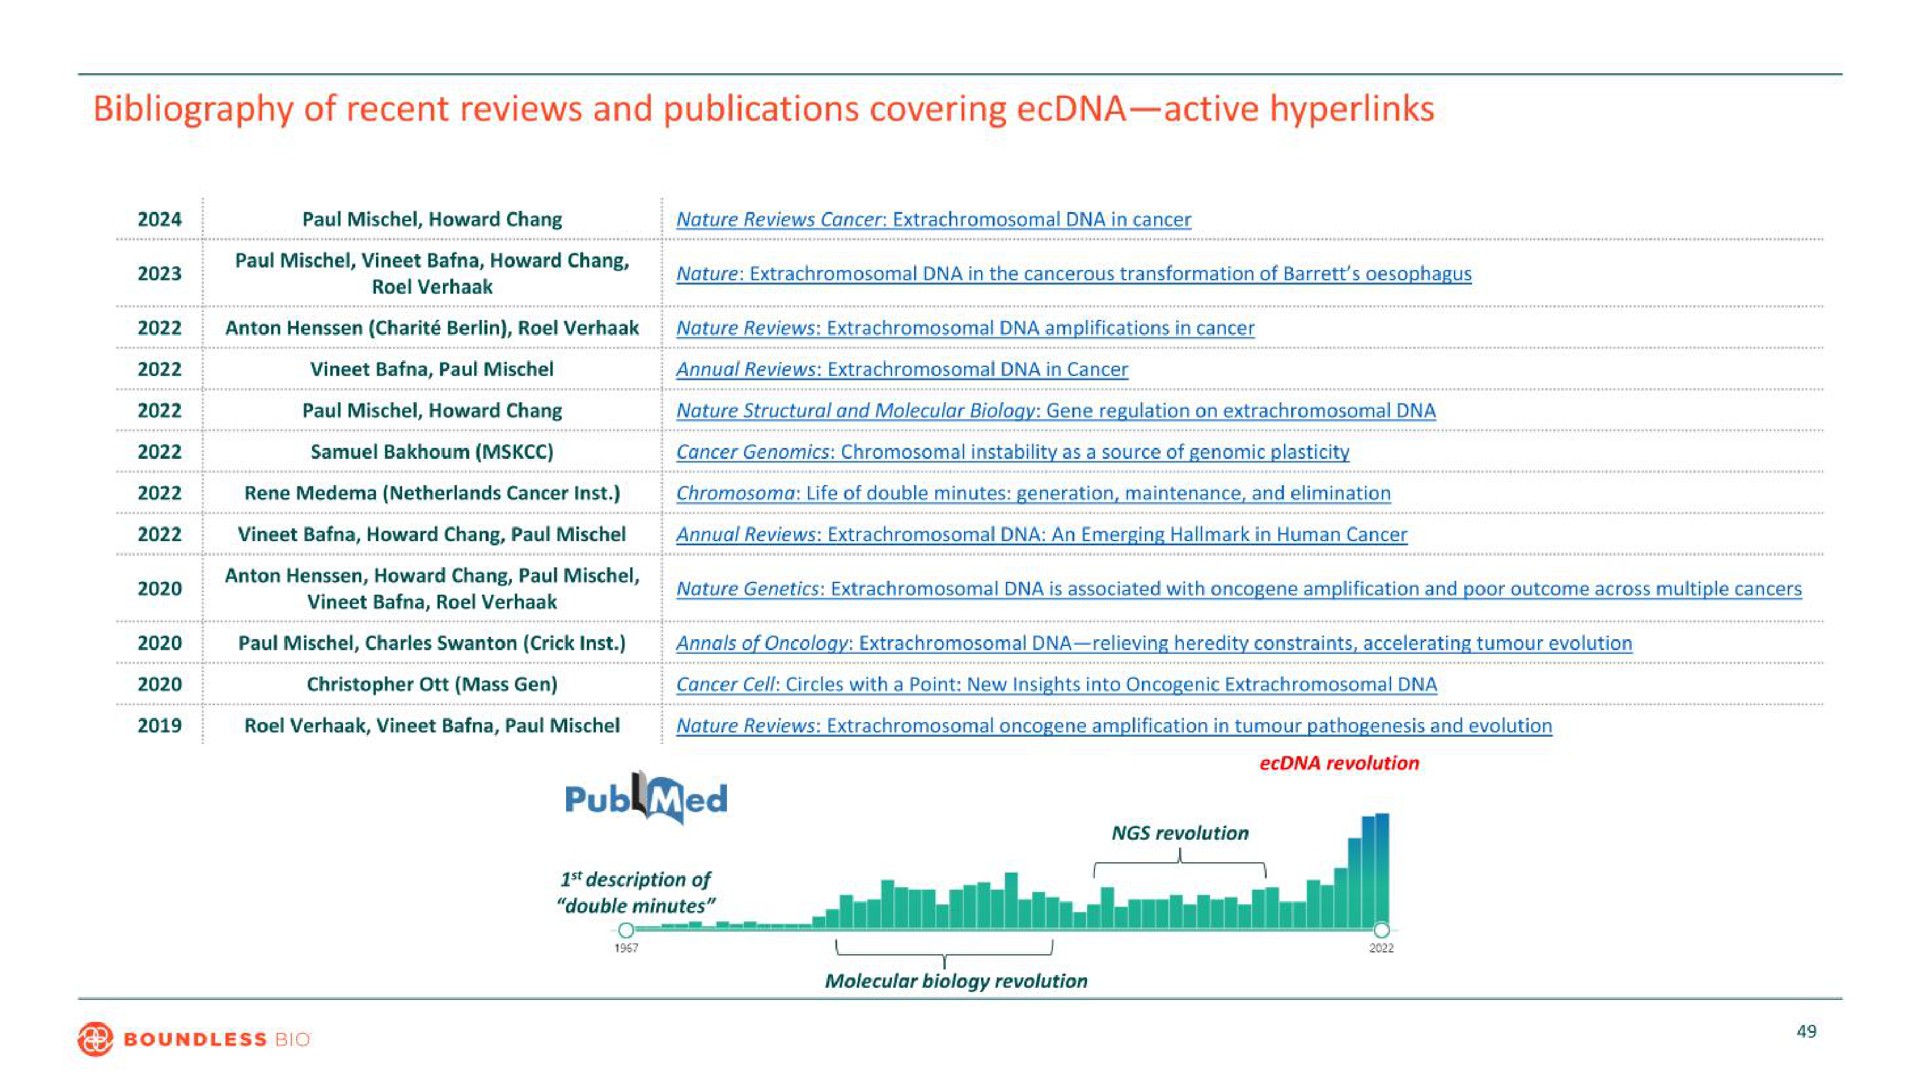 bibliography of recent reviews and publications covering active | Boundless Bio